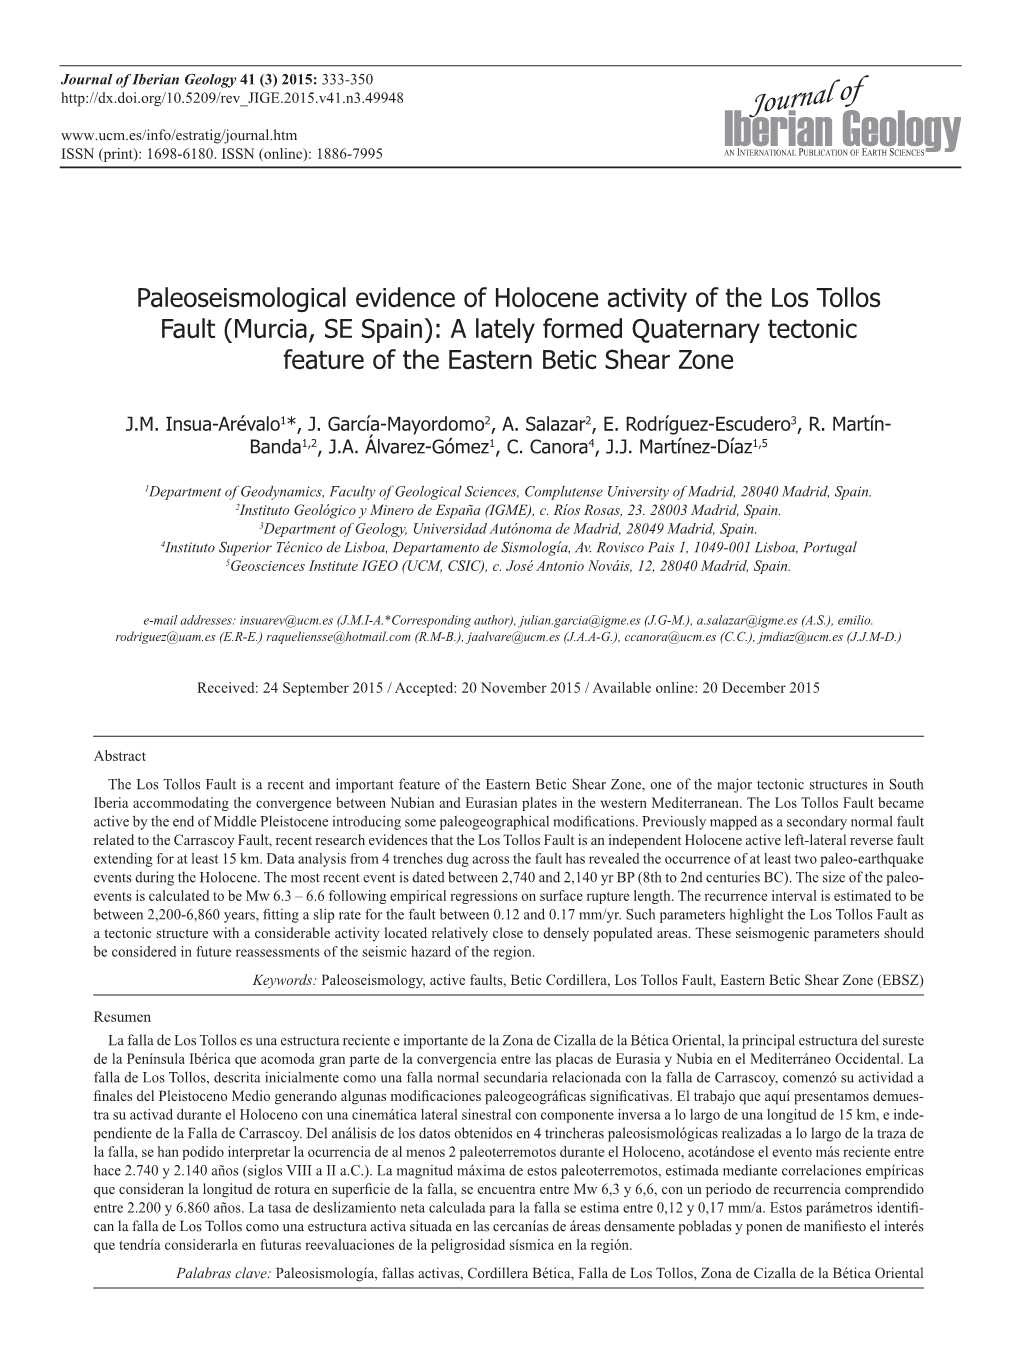 Paleoseismological Evidence of Holocene Activity of the Los Tollos